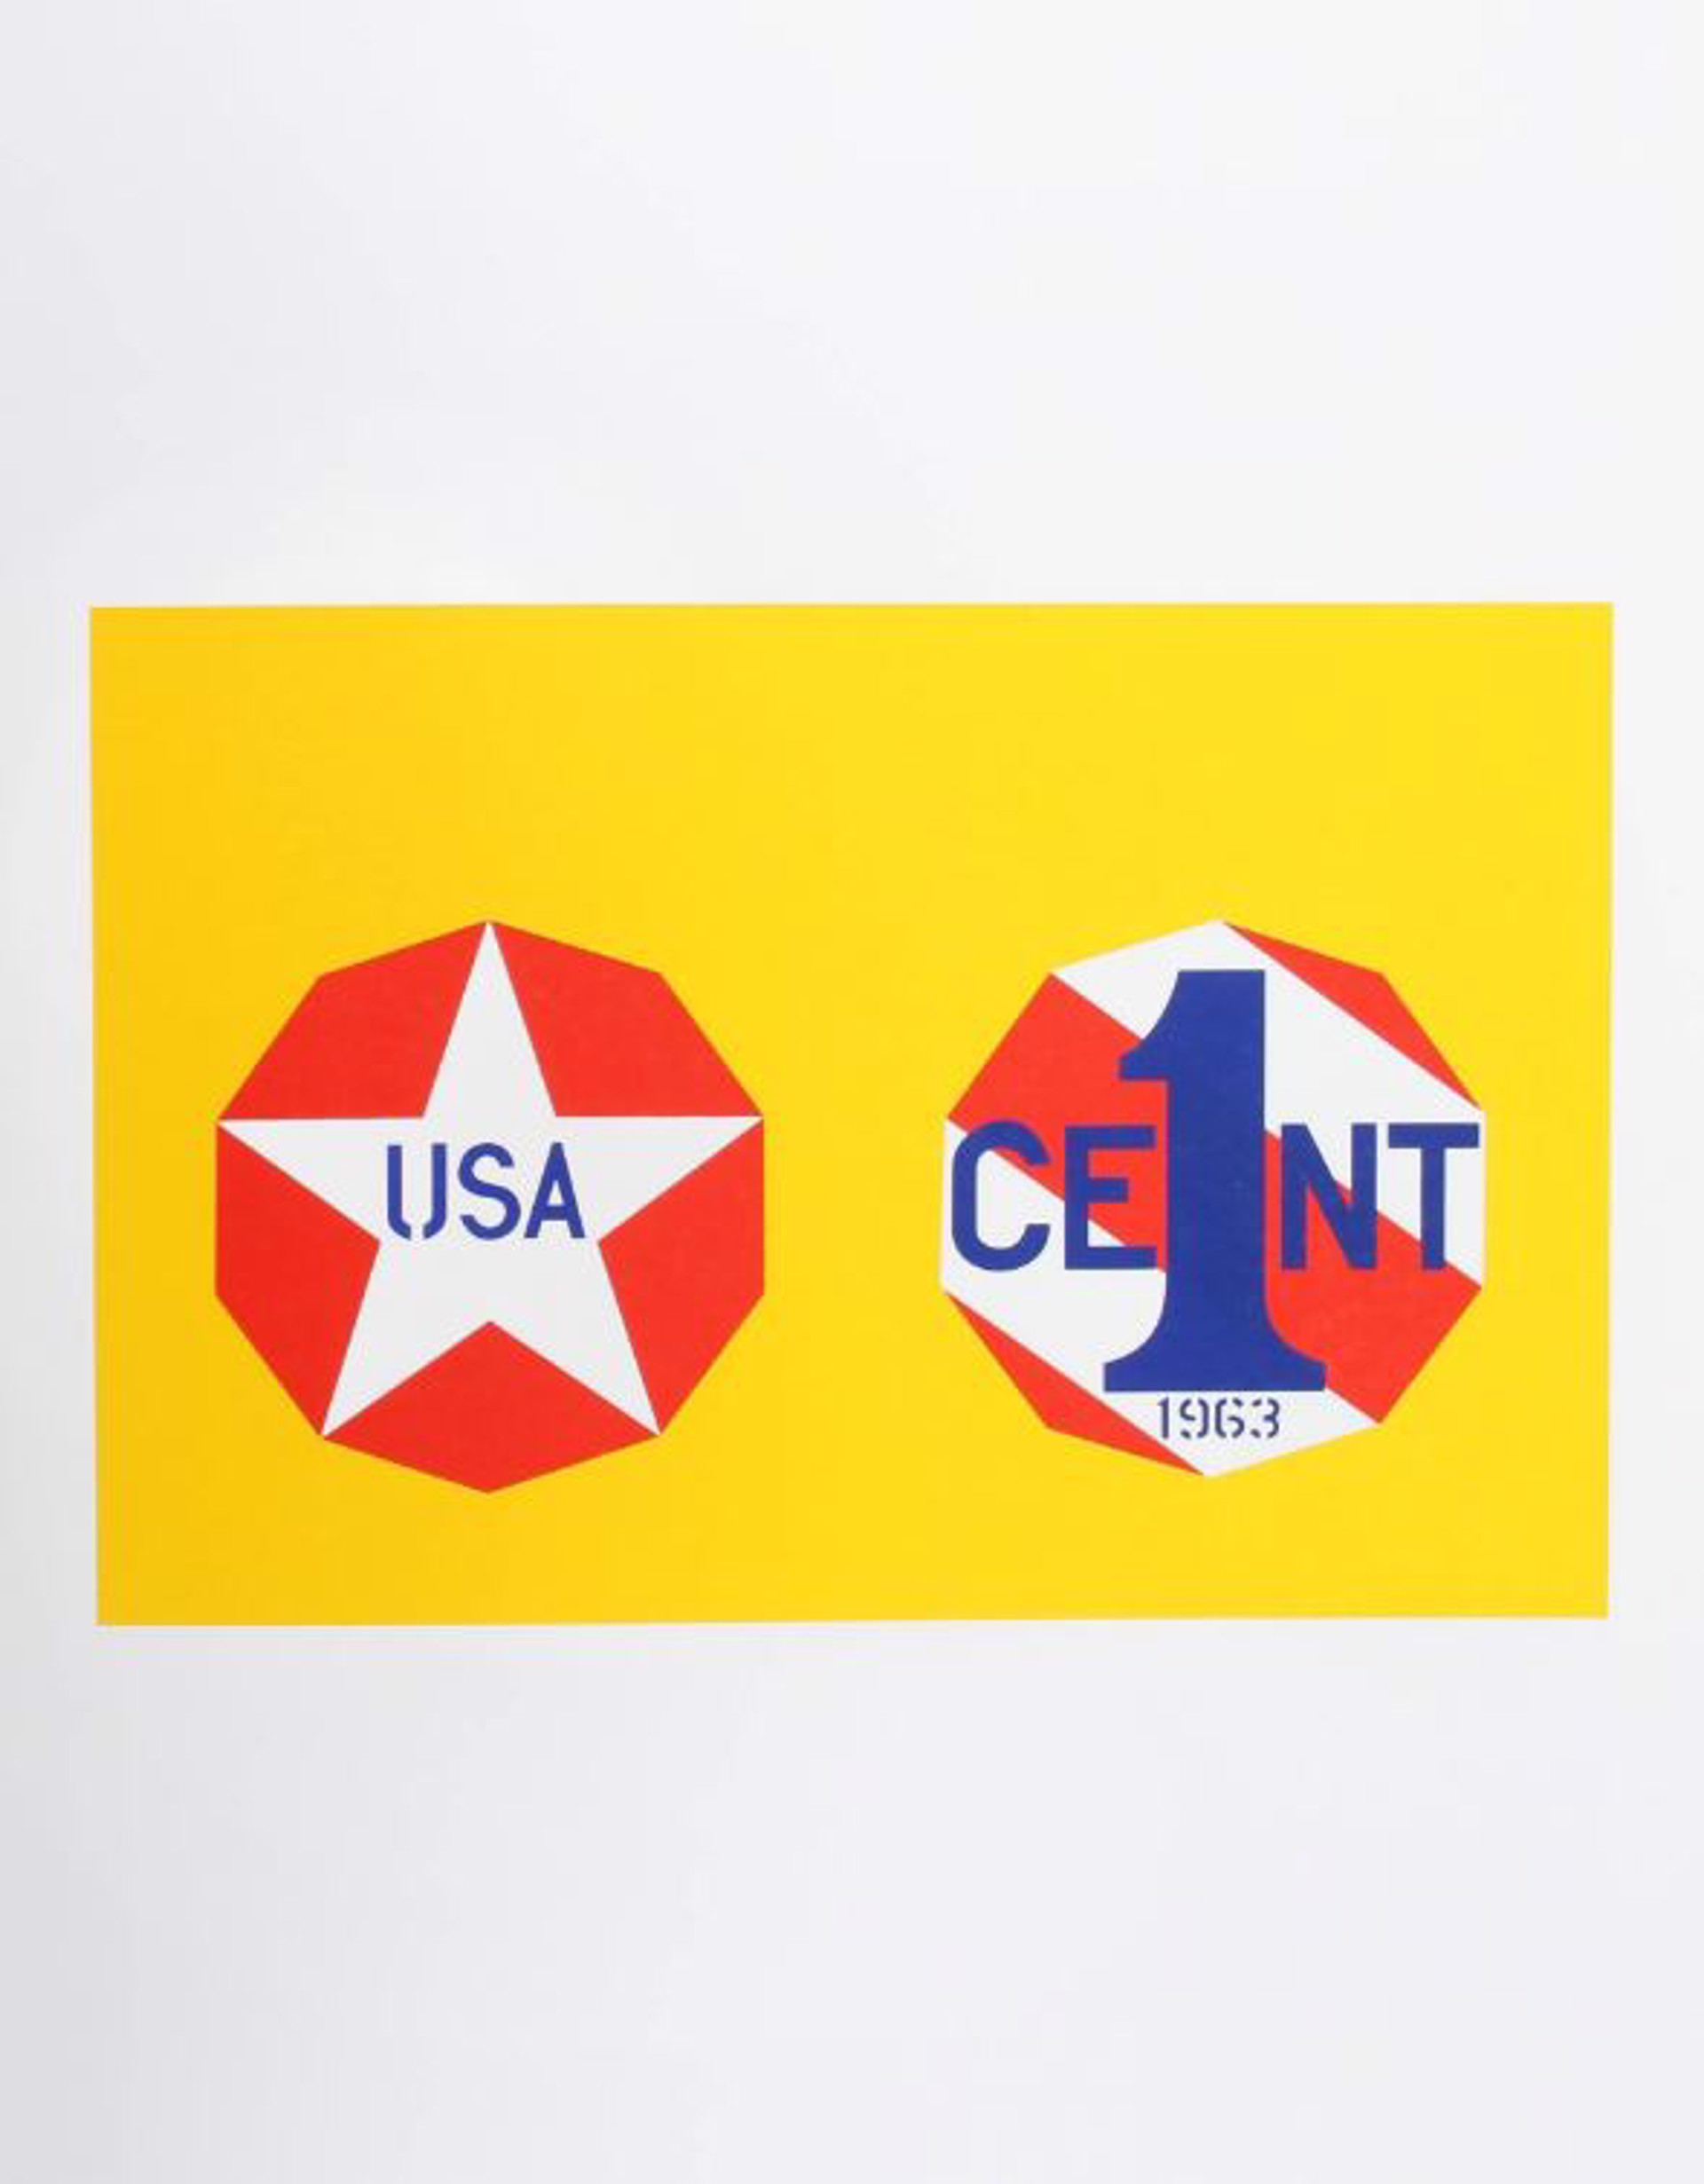 The New Glory Penny from The American Dream Portfolio by Robert Indiana